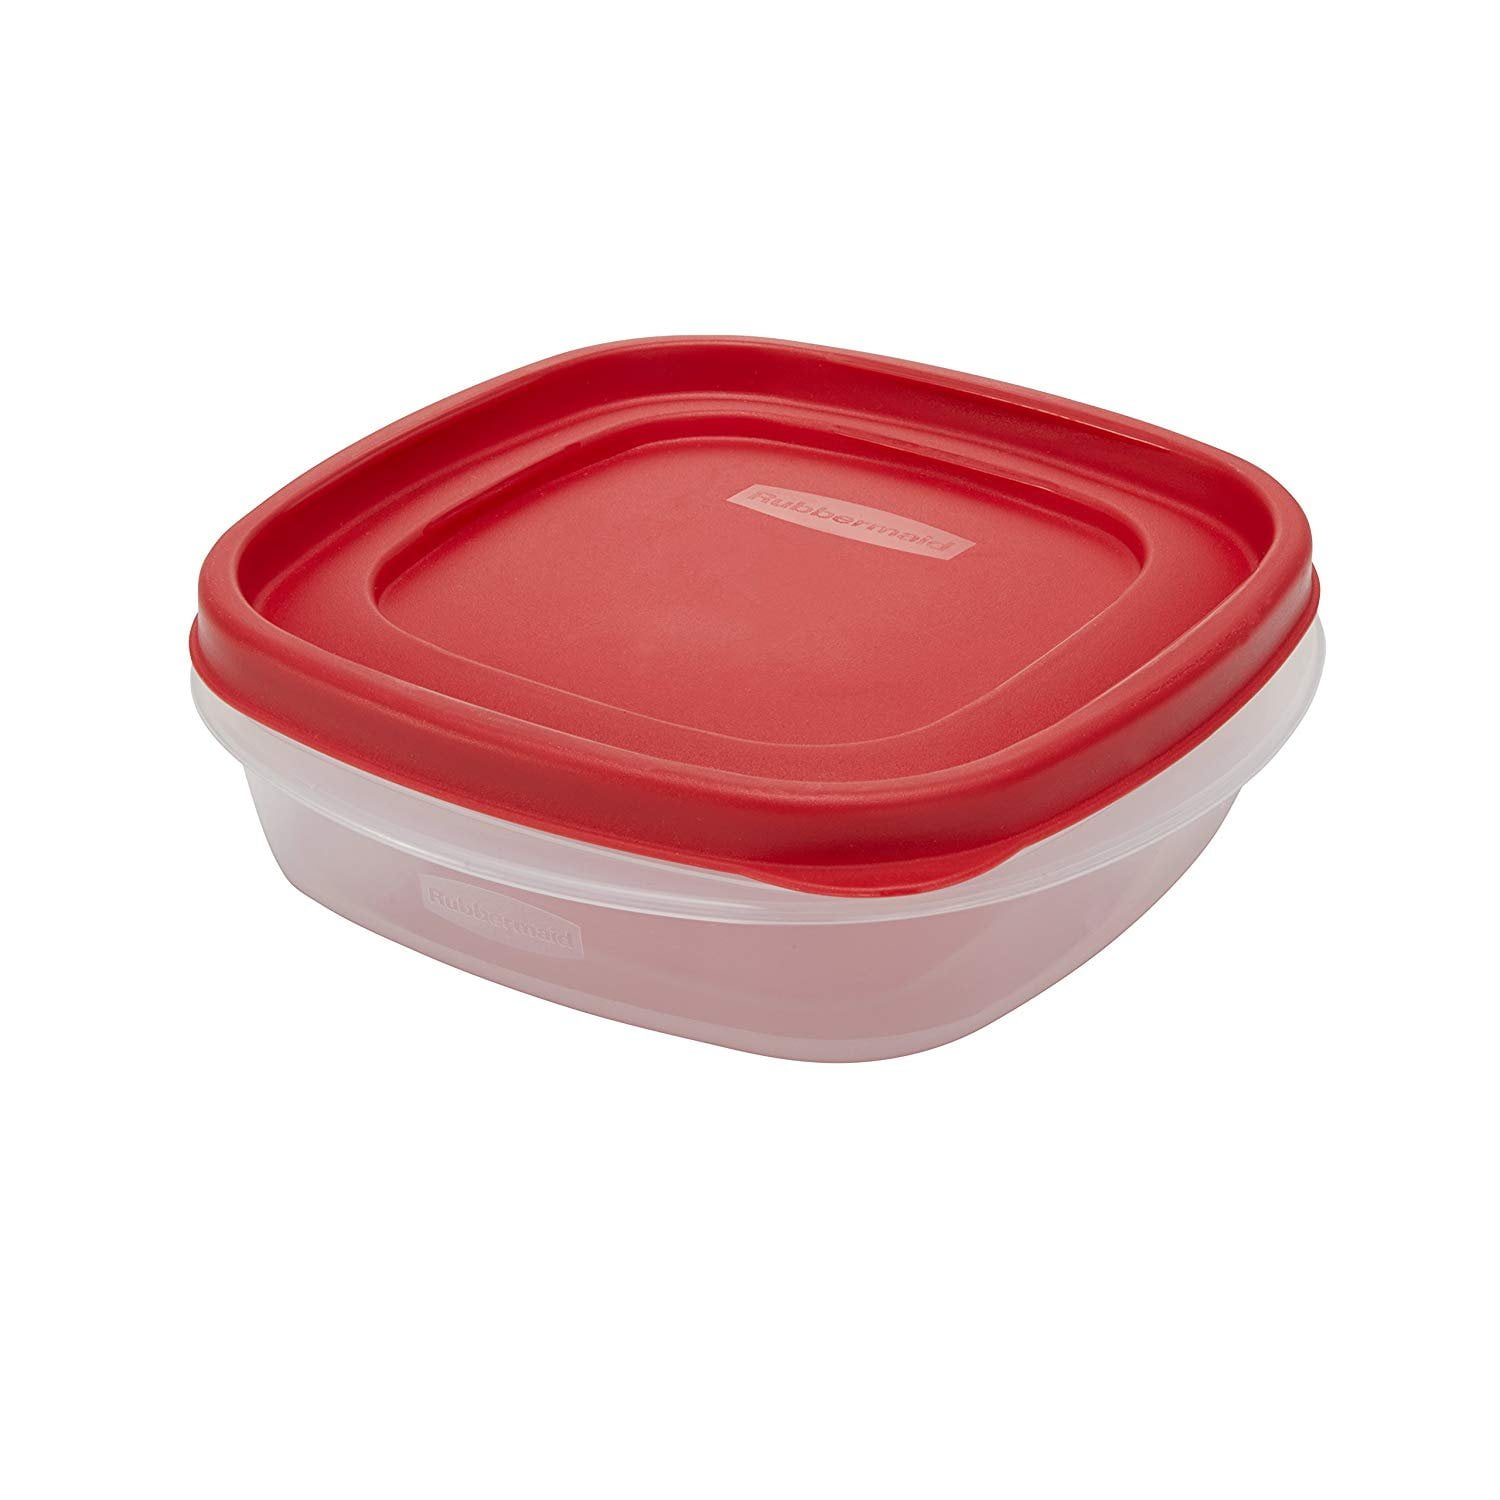 Rubbermaid® Easy-Find Lids Food Storage Container with Dividers - Racer  Red, 1 Count - Harris Teeter